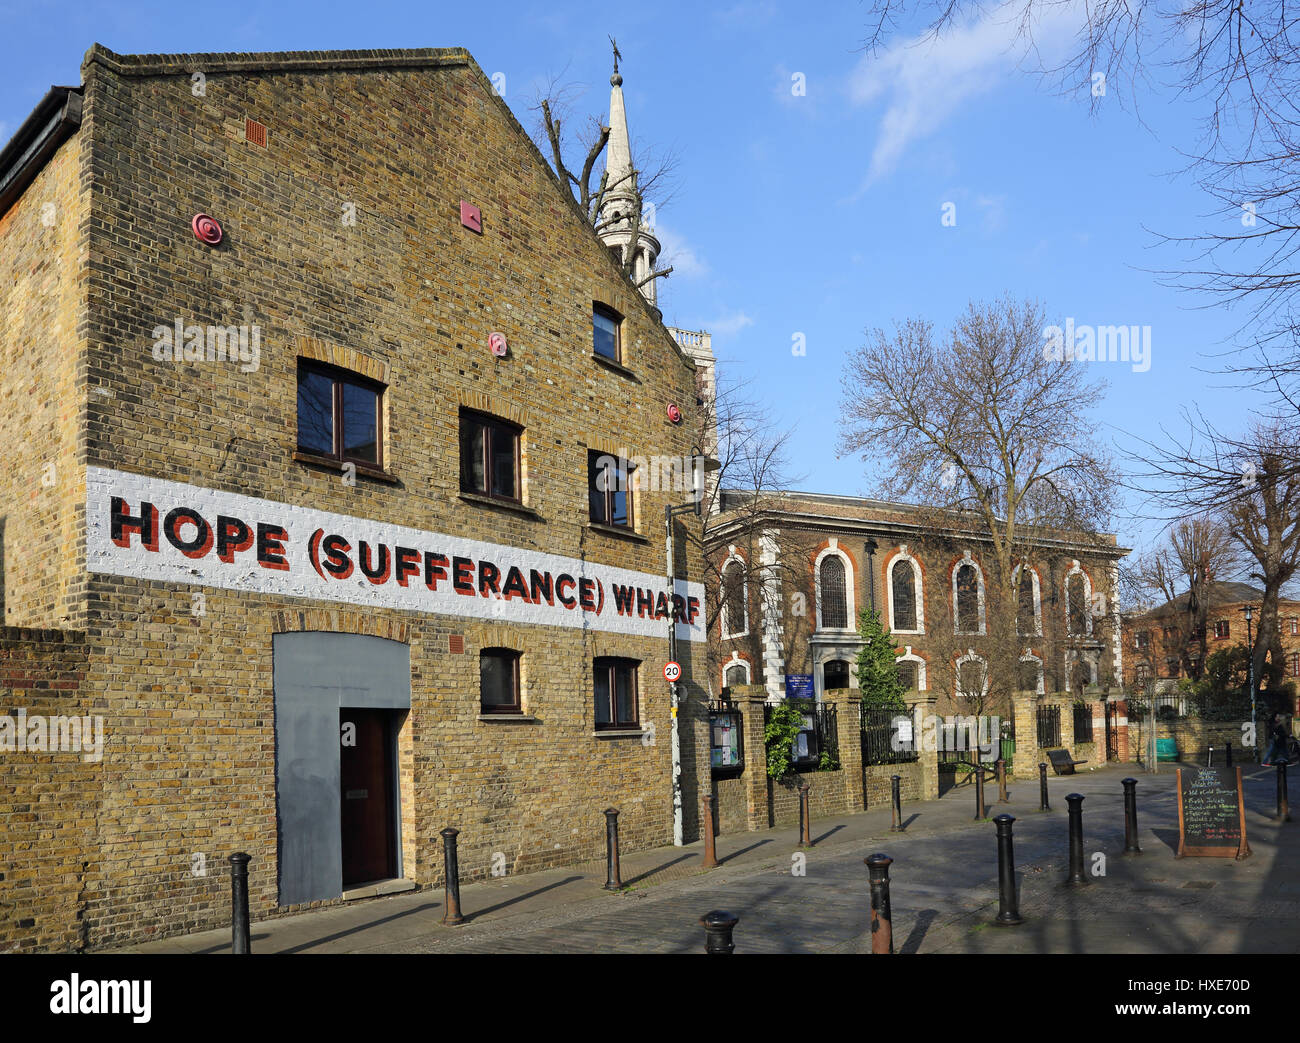 Hope Sufferance Wharf. Refurbished Victorian warehouses in Rotherhithe, East London, UK. Next to the church of St Mary the Stock Photo